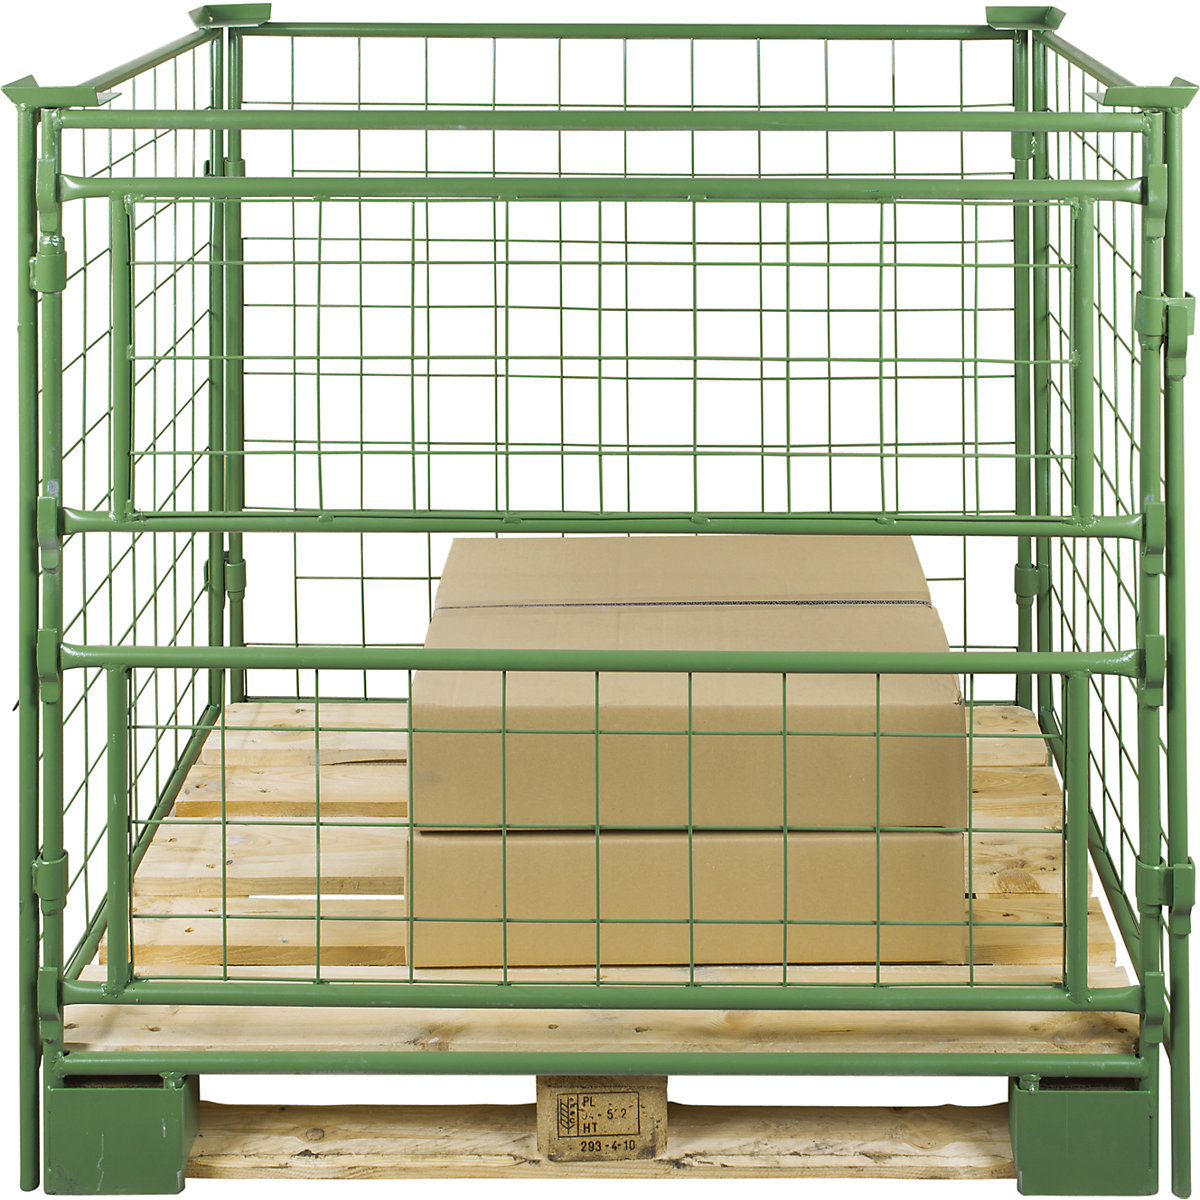 Pallet frame, effective height 1600 mm, for attaching, WxL 800 x 1200 mm, 1 long side with 2 parts, removable-1